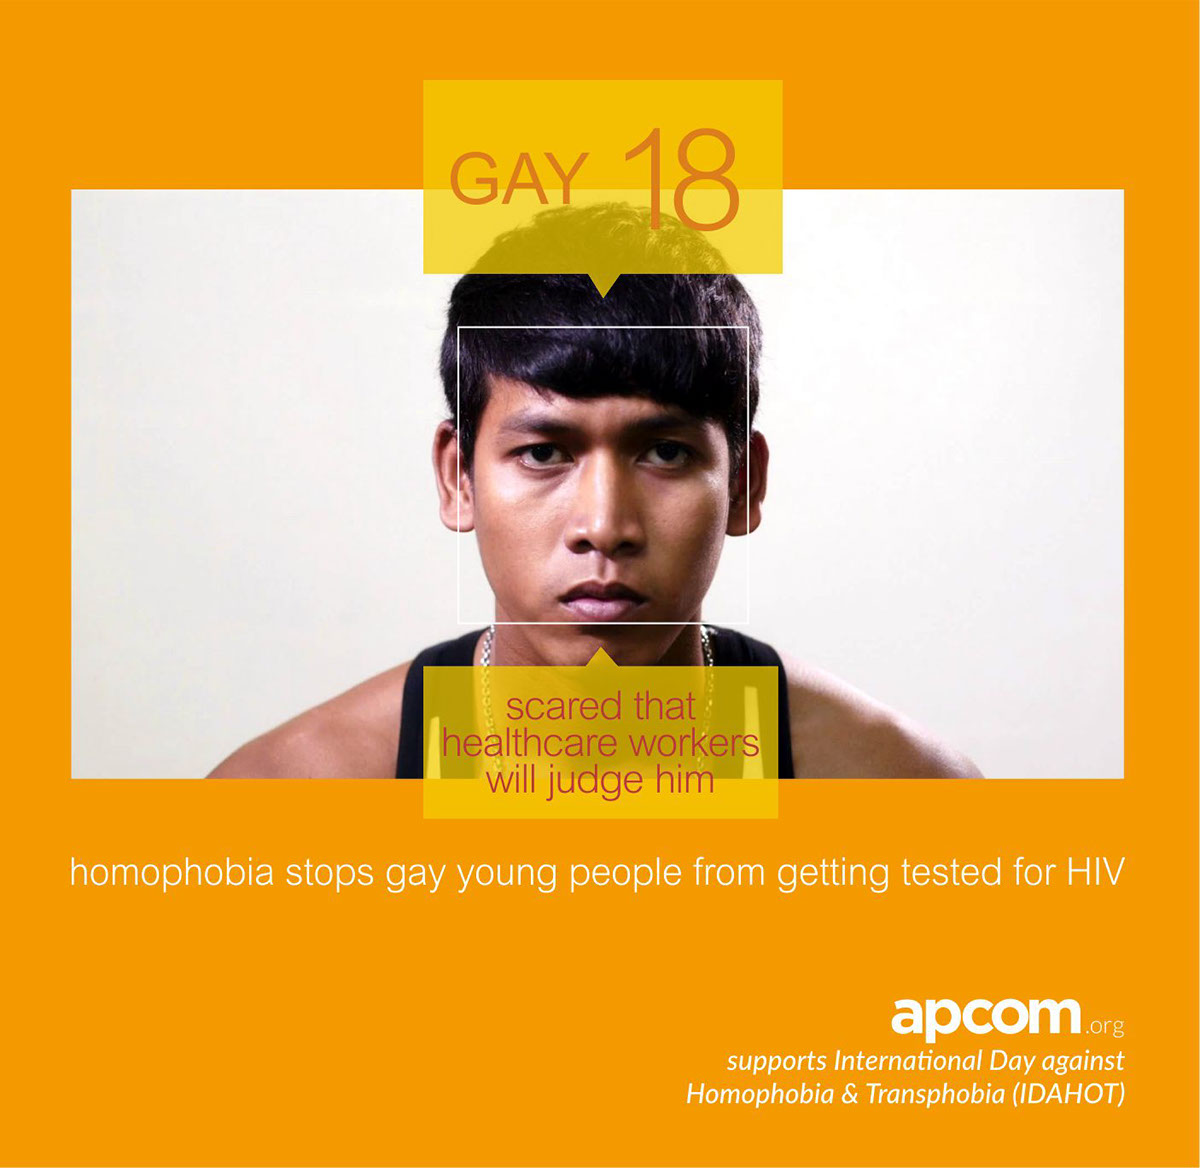 IDAHOT LGBT gay transgender youth homophobia transphobia day against homophobia howoldrobot Meme young people asia pacific